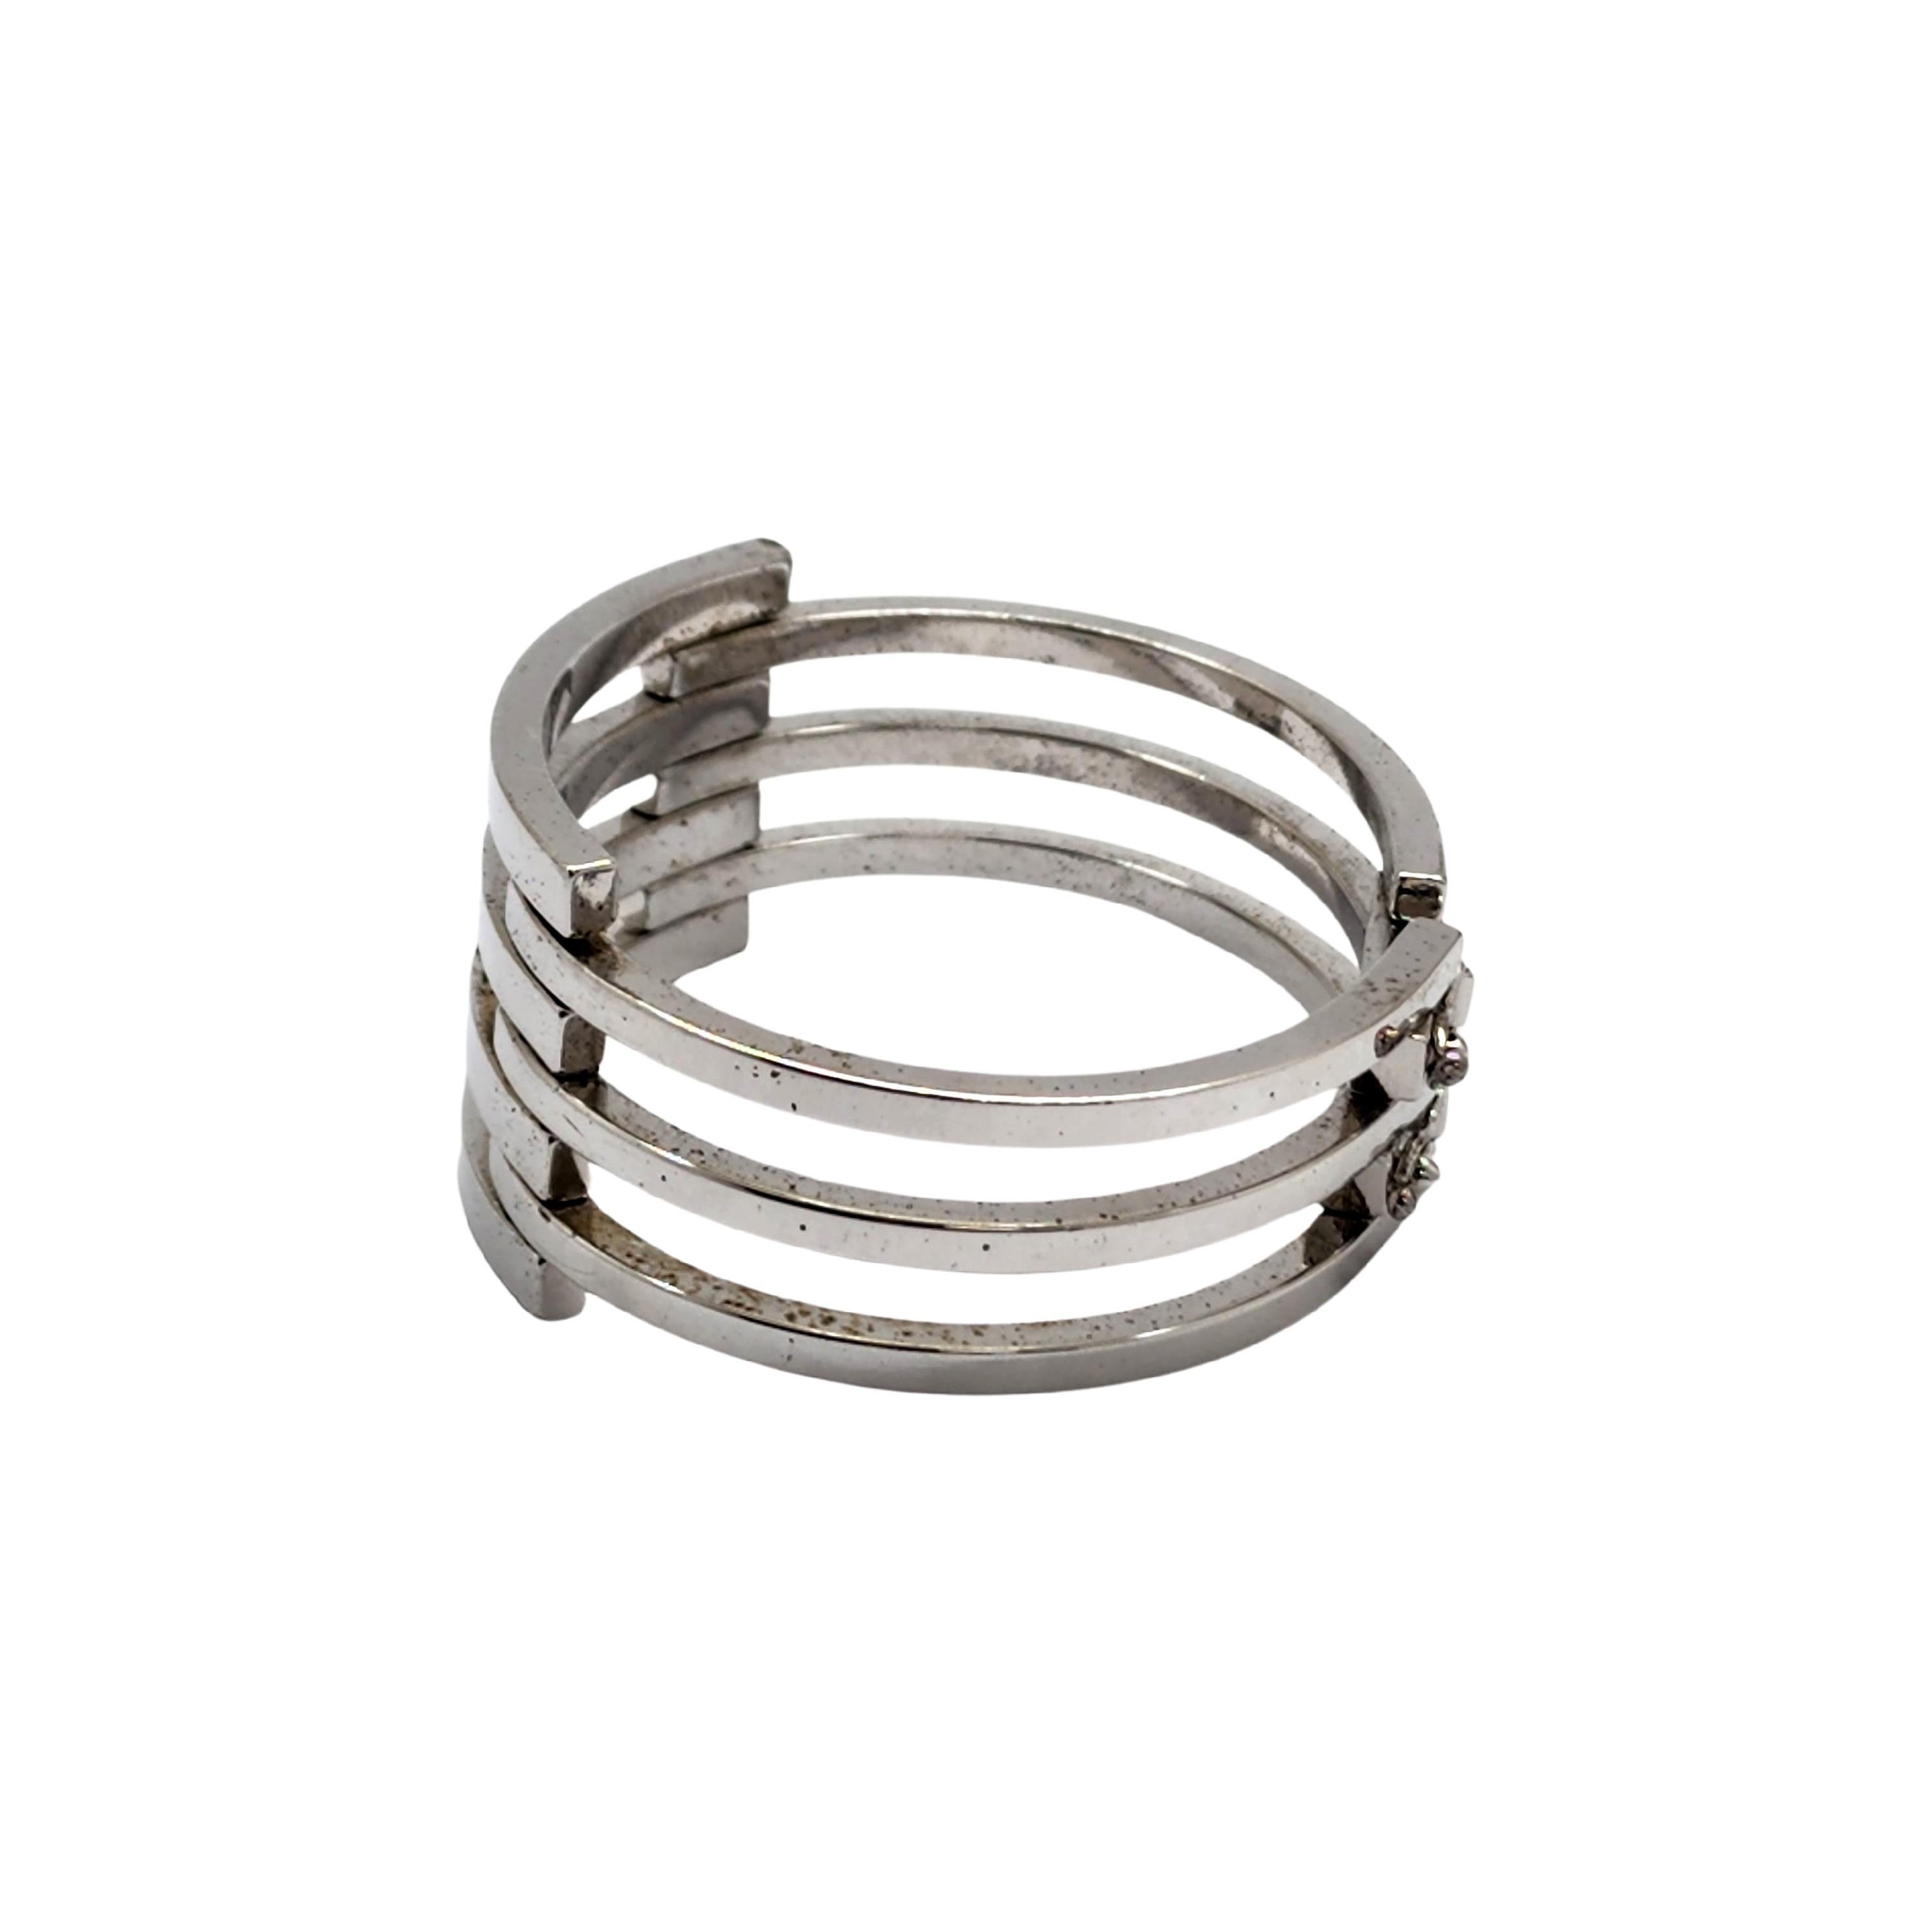 Sterling silver modernist open bar design hinged bangle bracelet by OP Orlandini of Italy.

Beautiful large and substantial Uno a Erre bracelet featuring bar design with double closure clasps with 2 safety clasps.

Measures 6 1/2